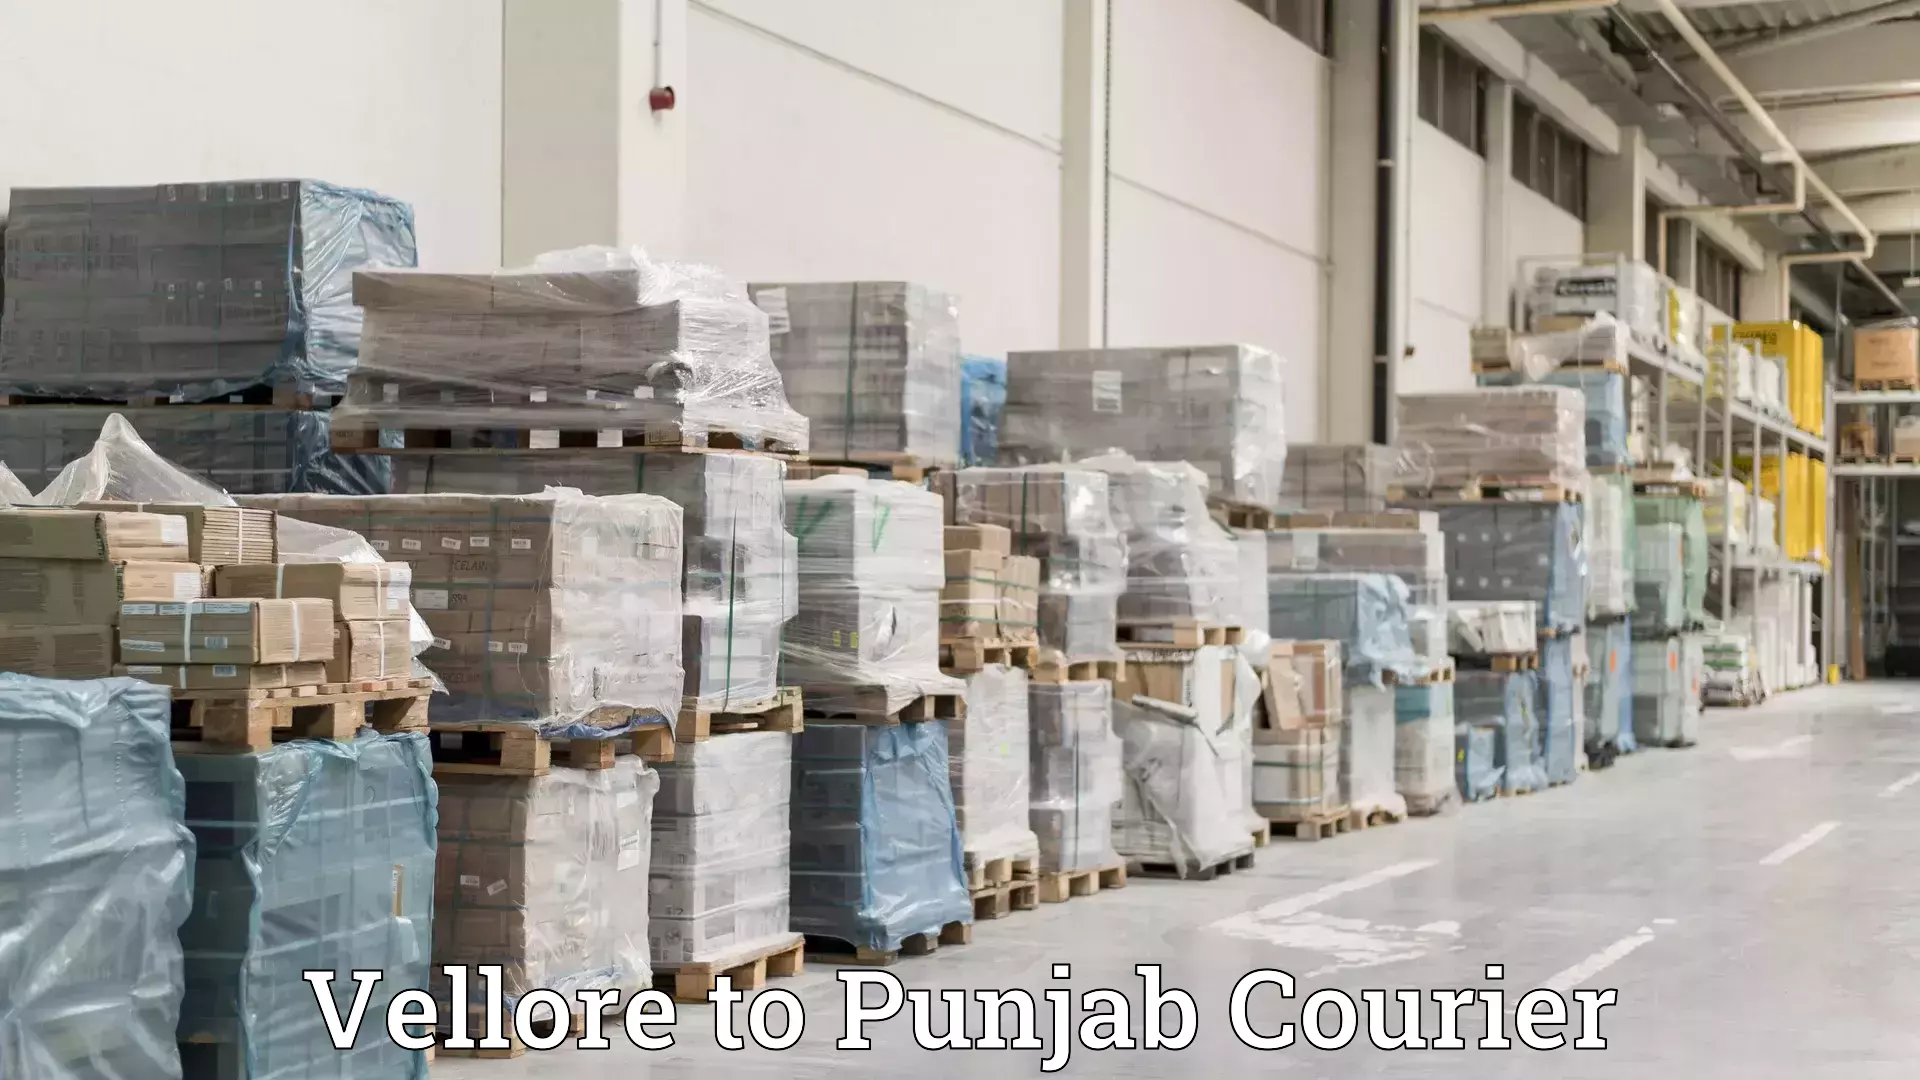 Efficient relocation services in Vellore to Punjab